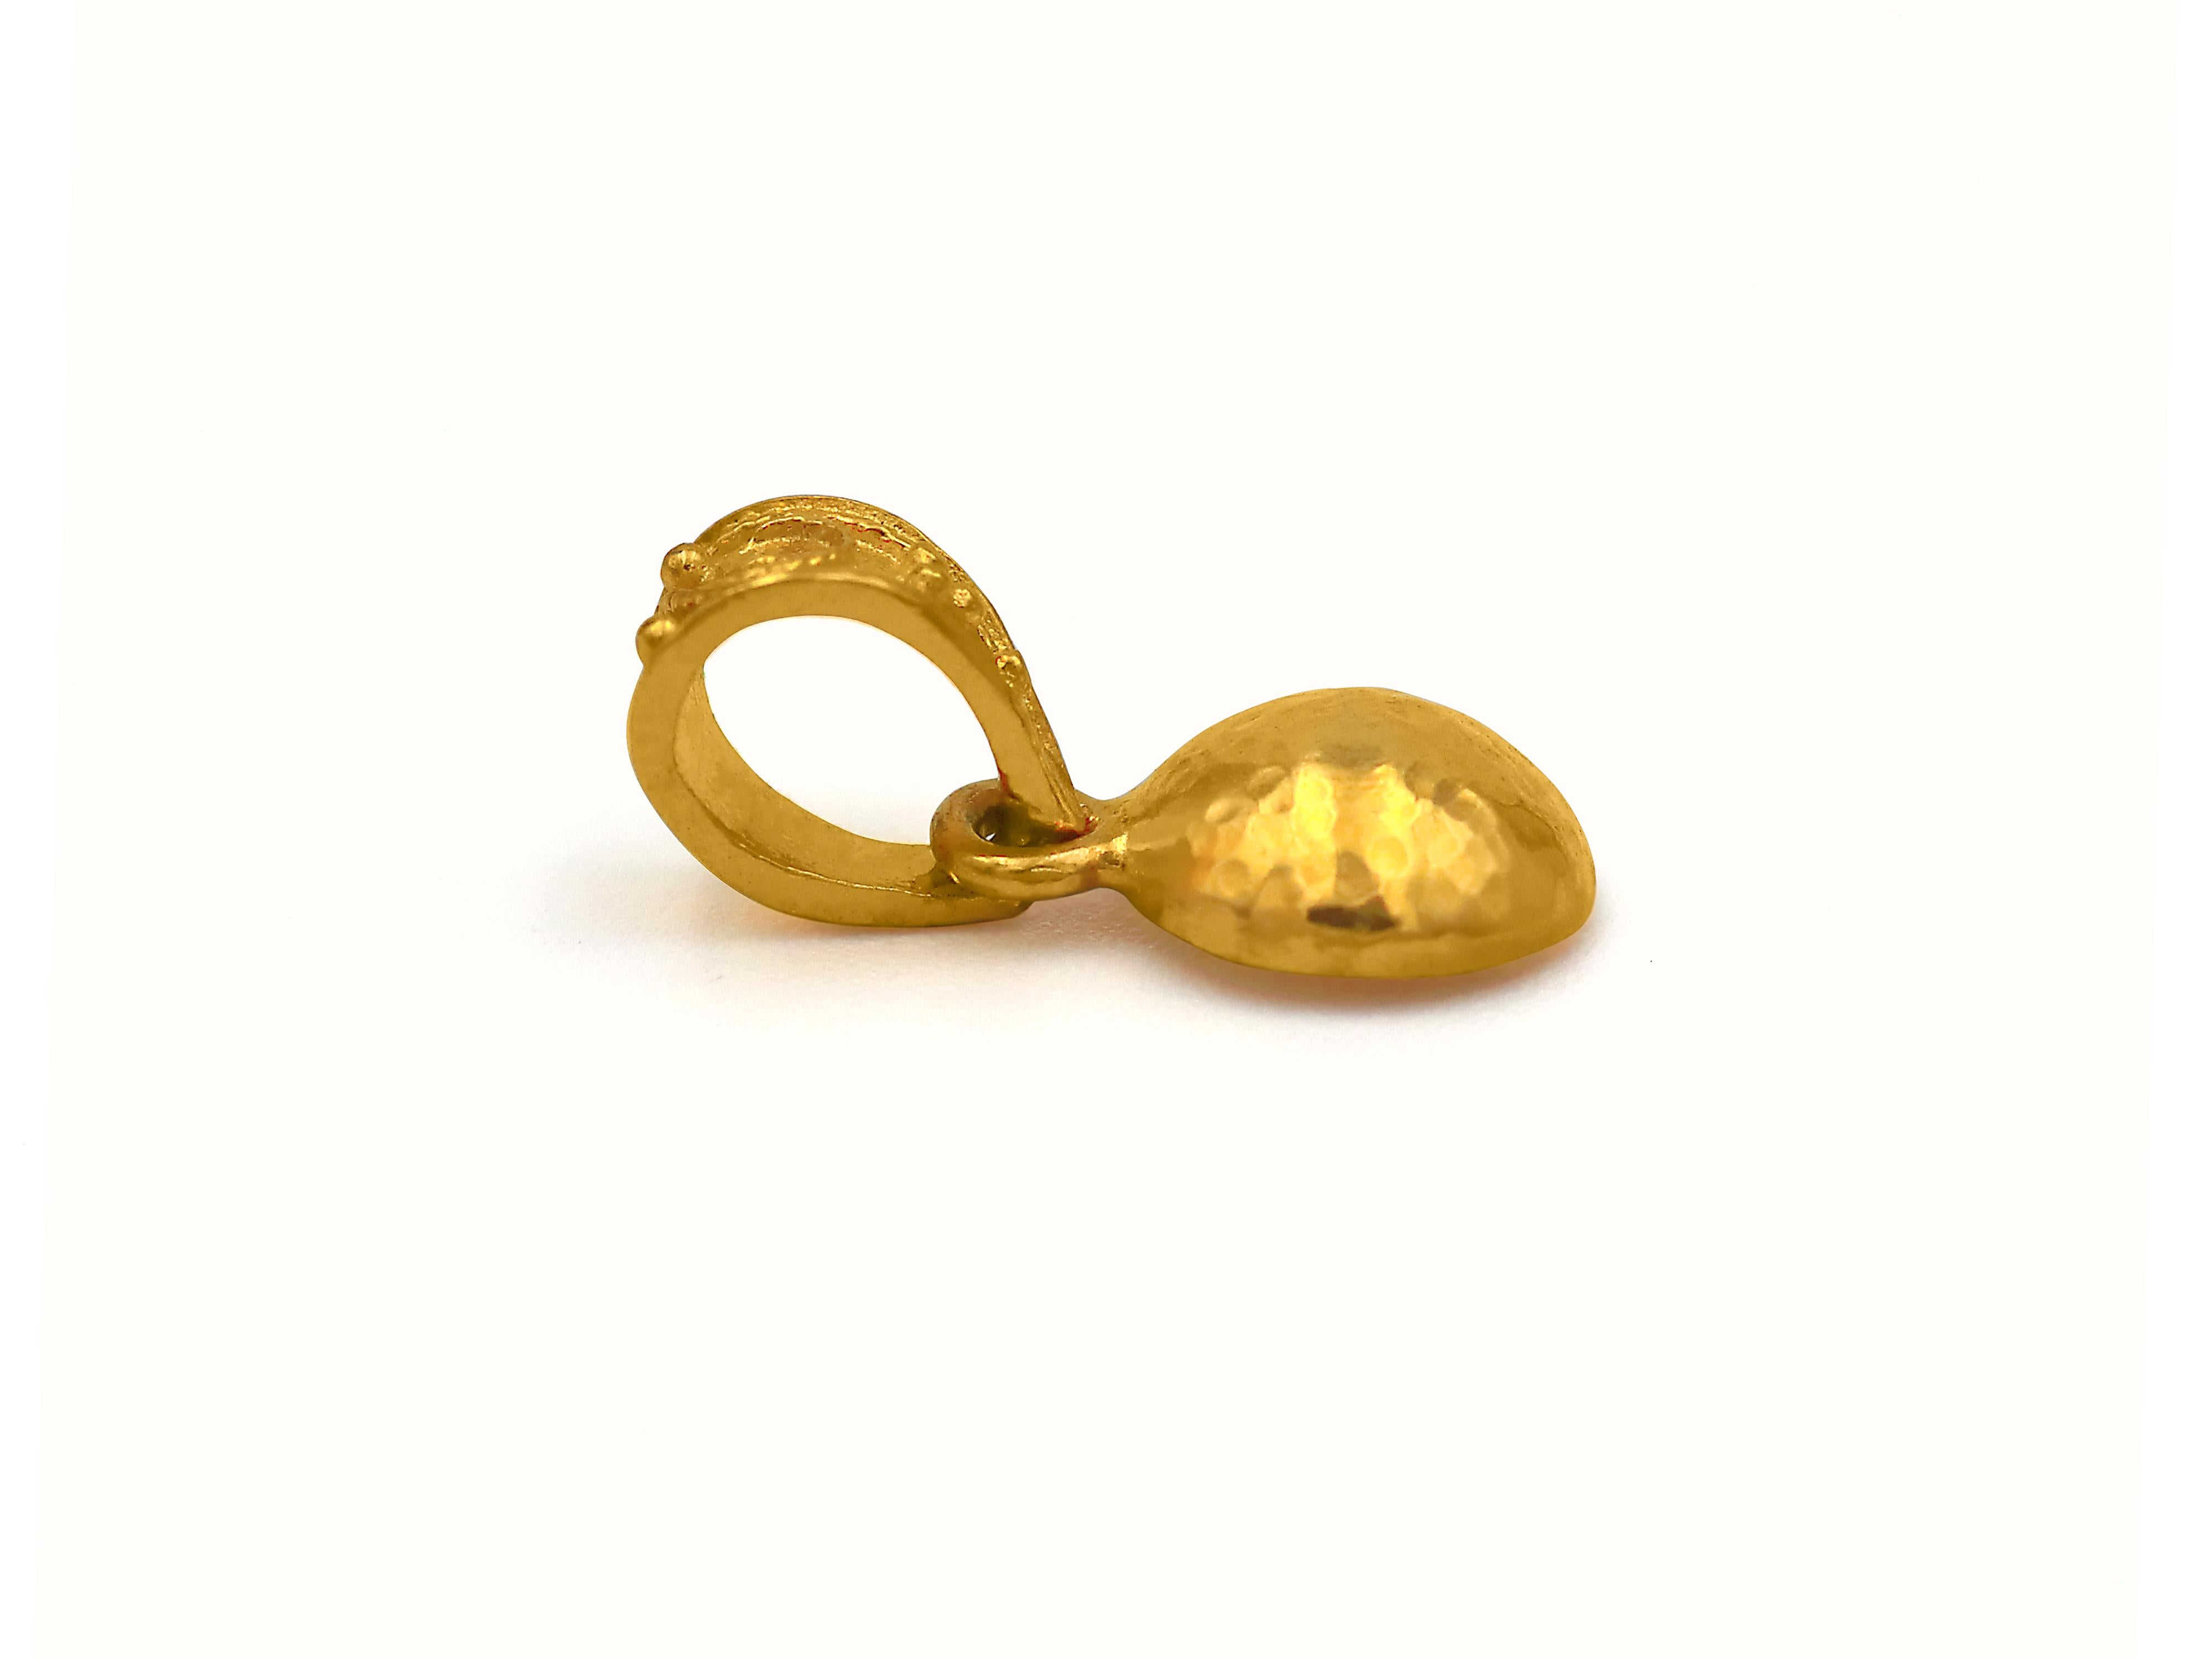 Neoclassical 18k Gold Era's Hammered Pendant For Sale